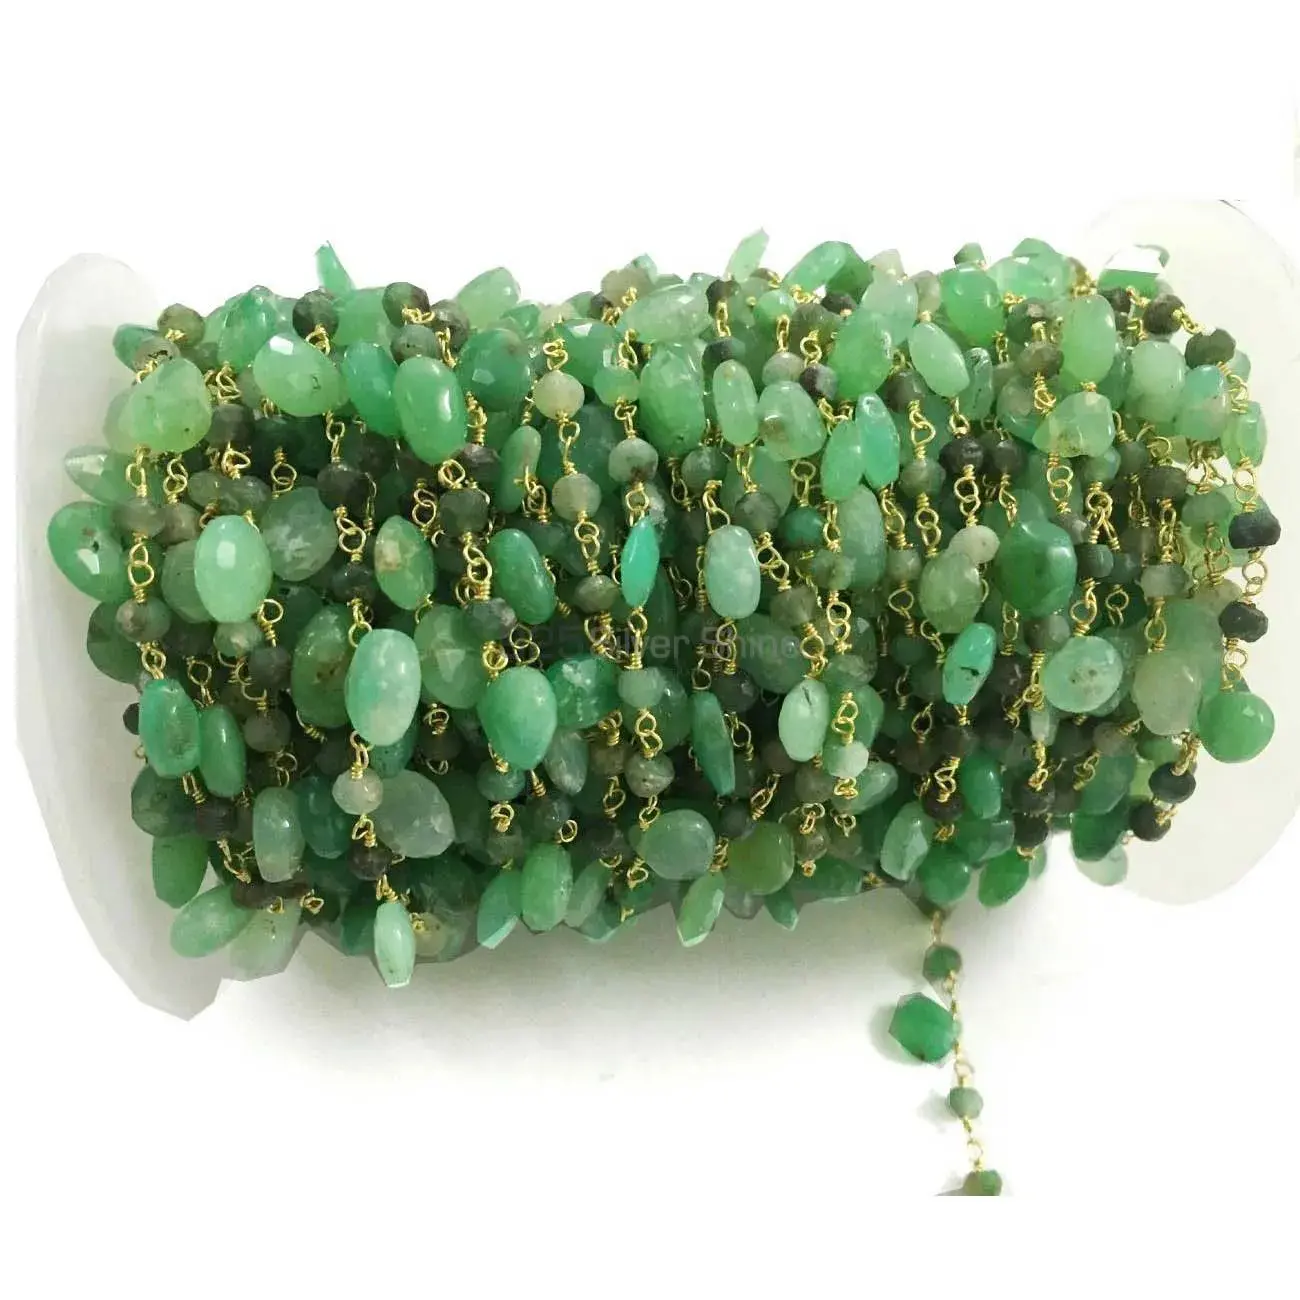 Chrysoprase Gemstone Rosary Chain. "Wire Wrapped 1 Feet Roll Chain" 925RC188